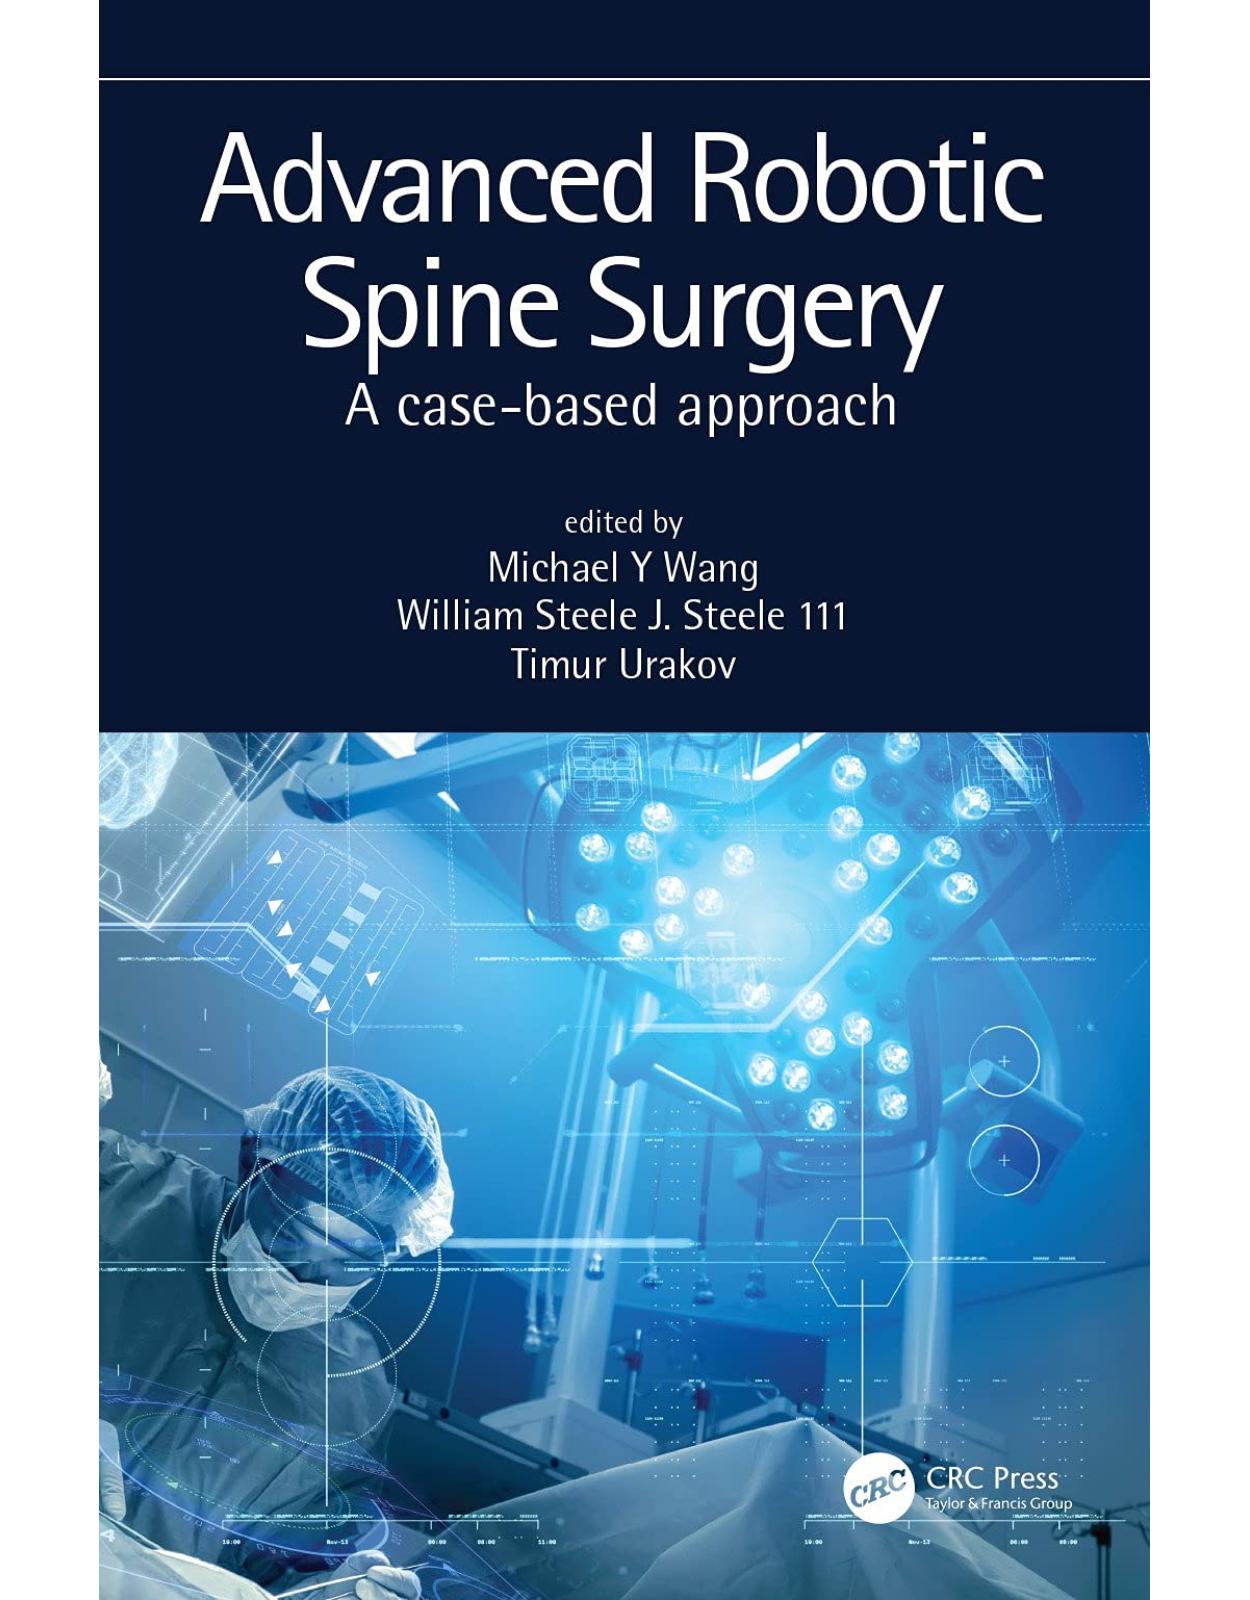 Advanced Robotic Spine Surgery: A case-based approach